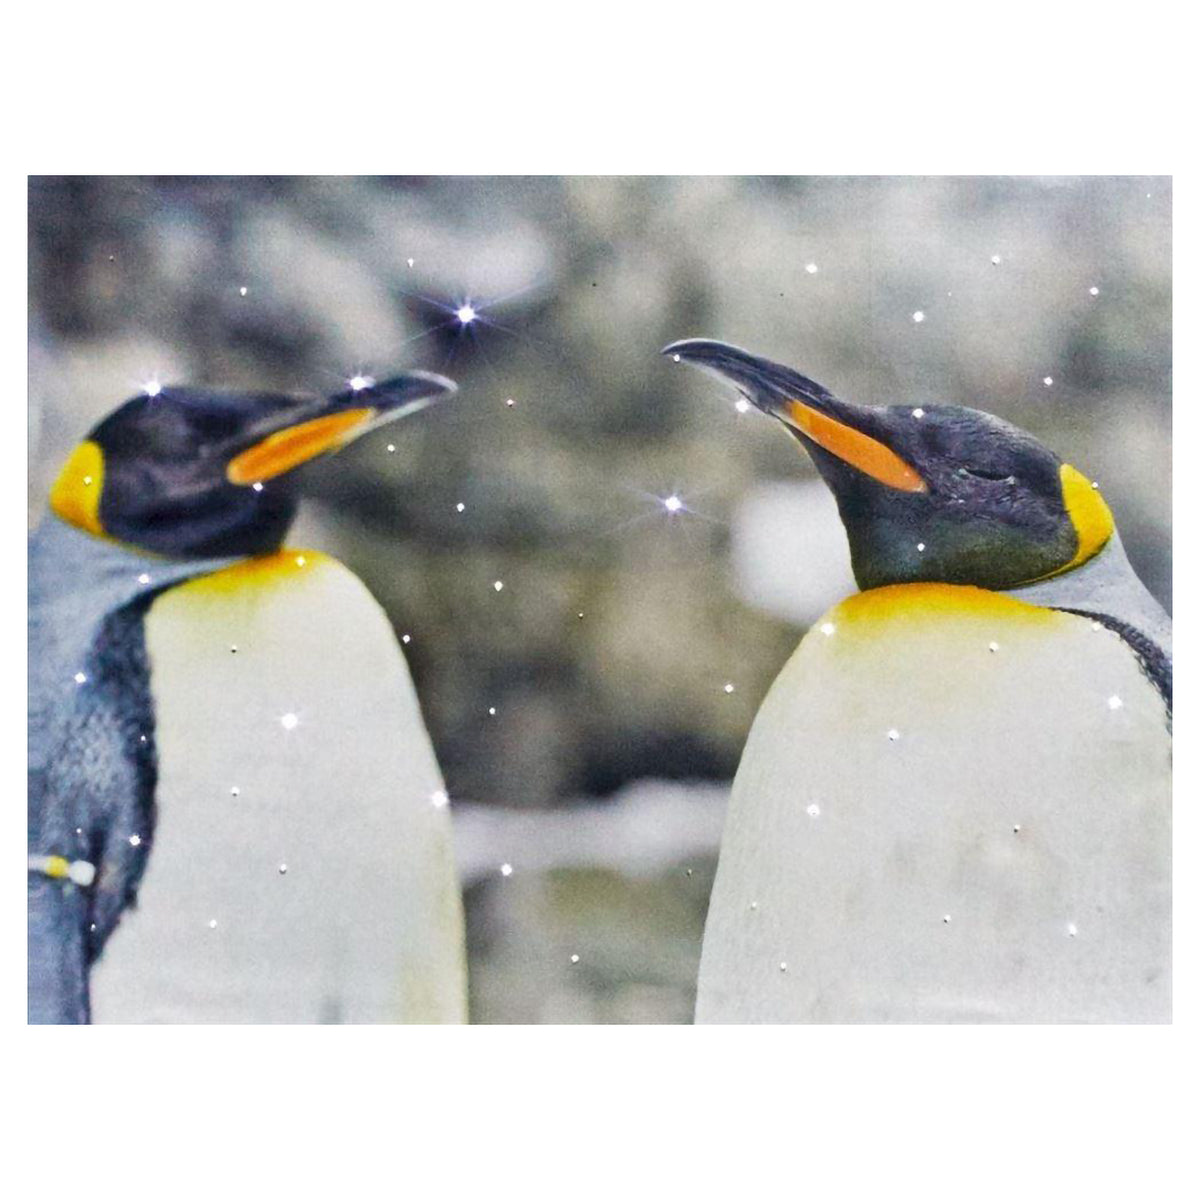 Penguin Couple Christmas Wall Art Canvas with White Twinkling Lights